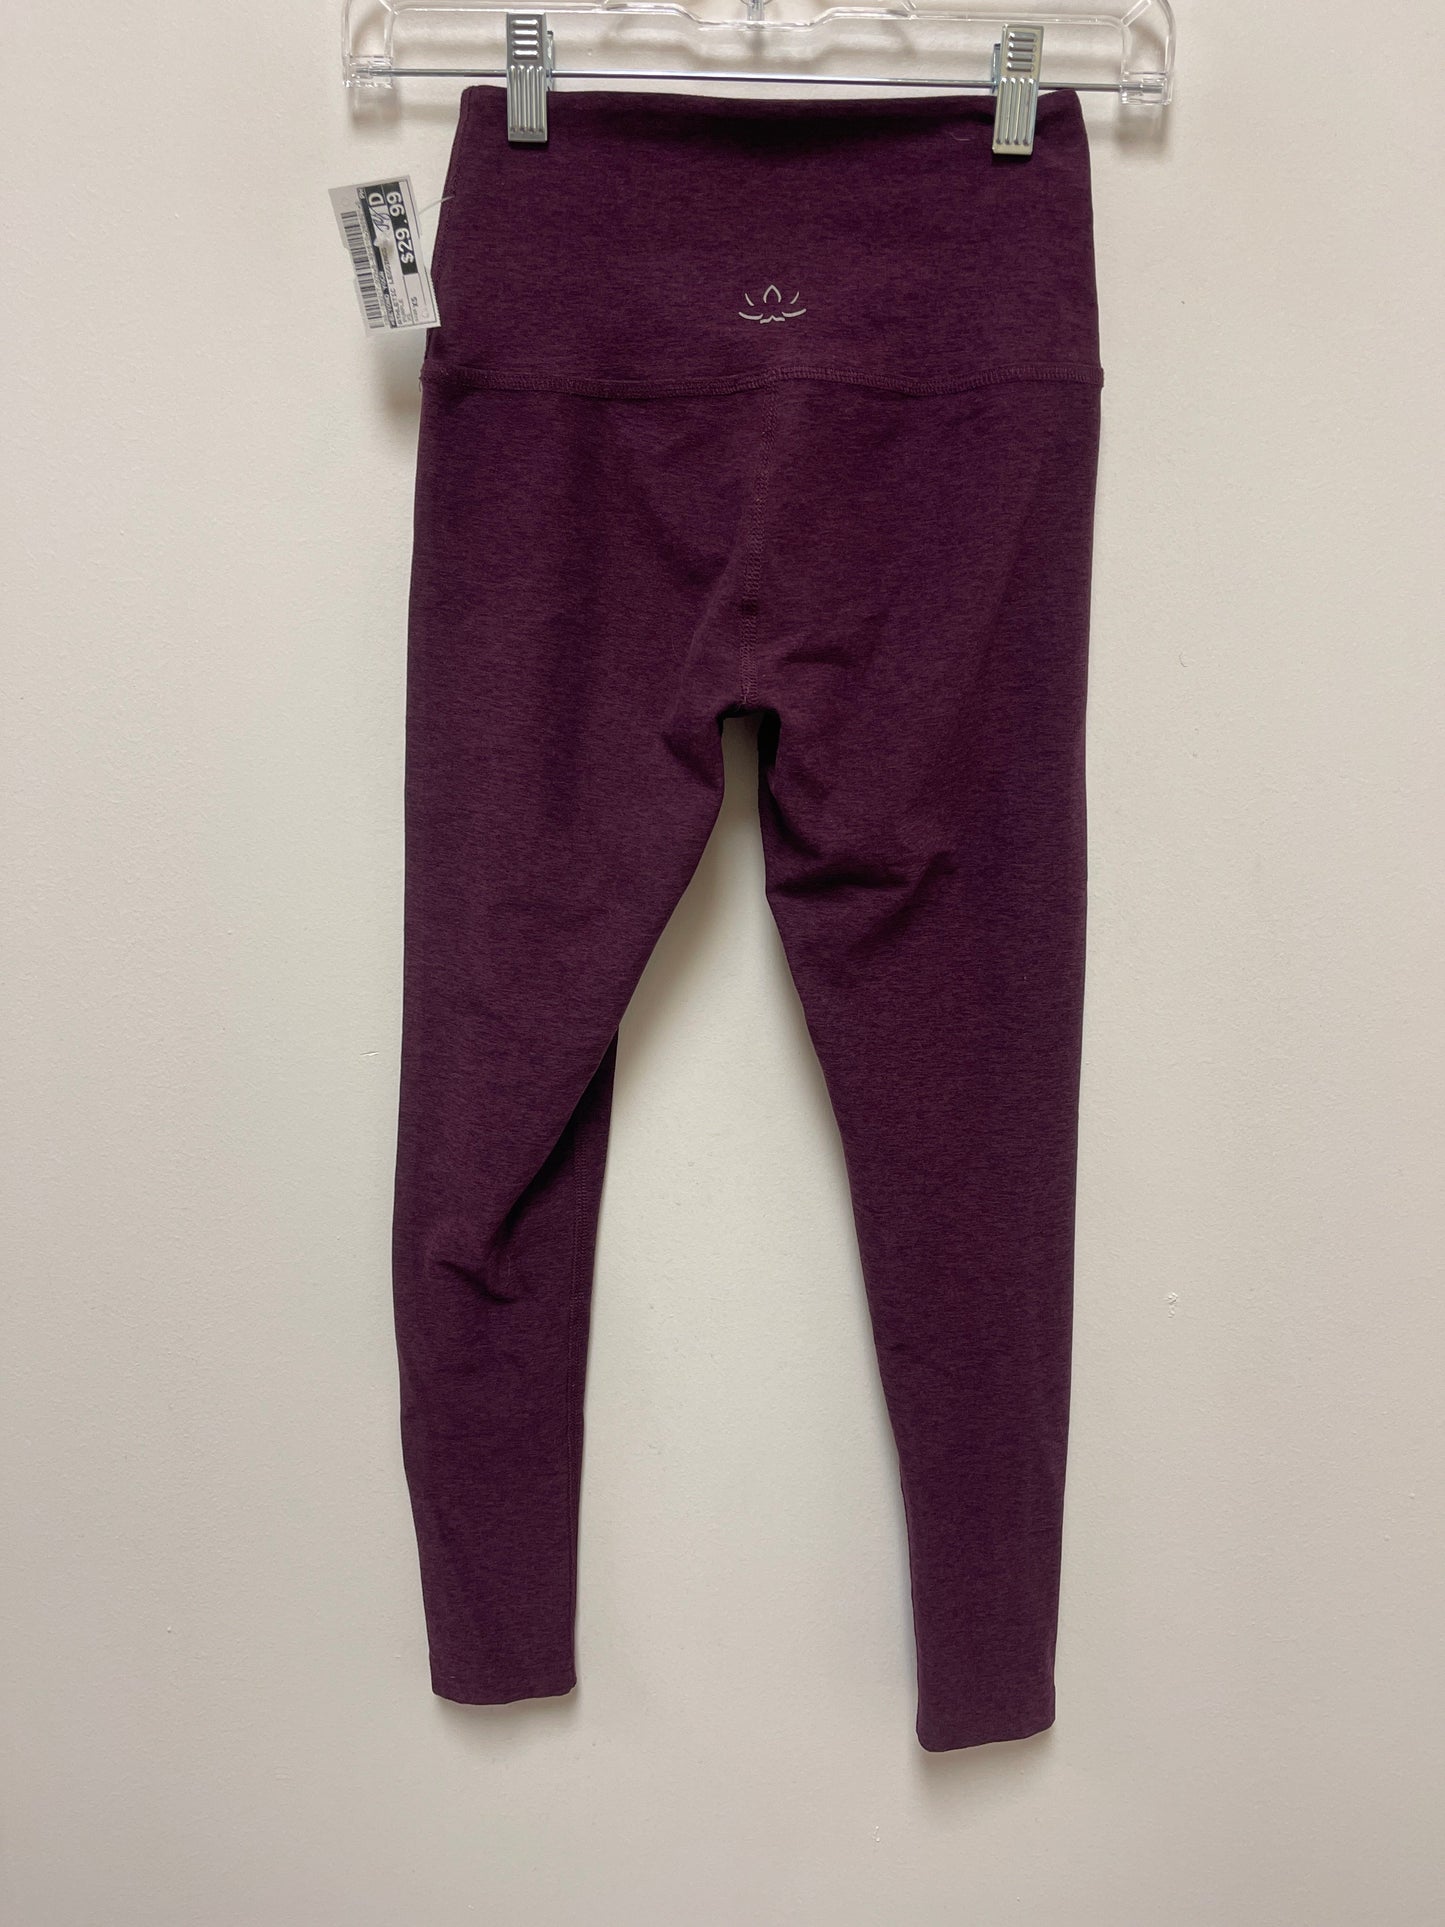 Athletic Leggings By Beyond Yoga  Size: Xs